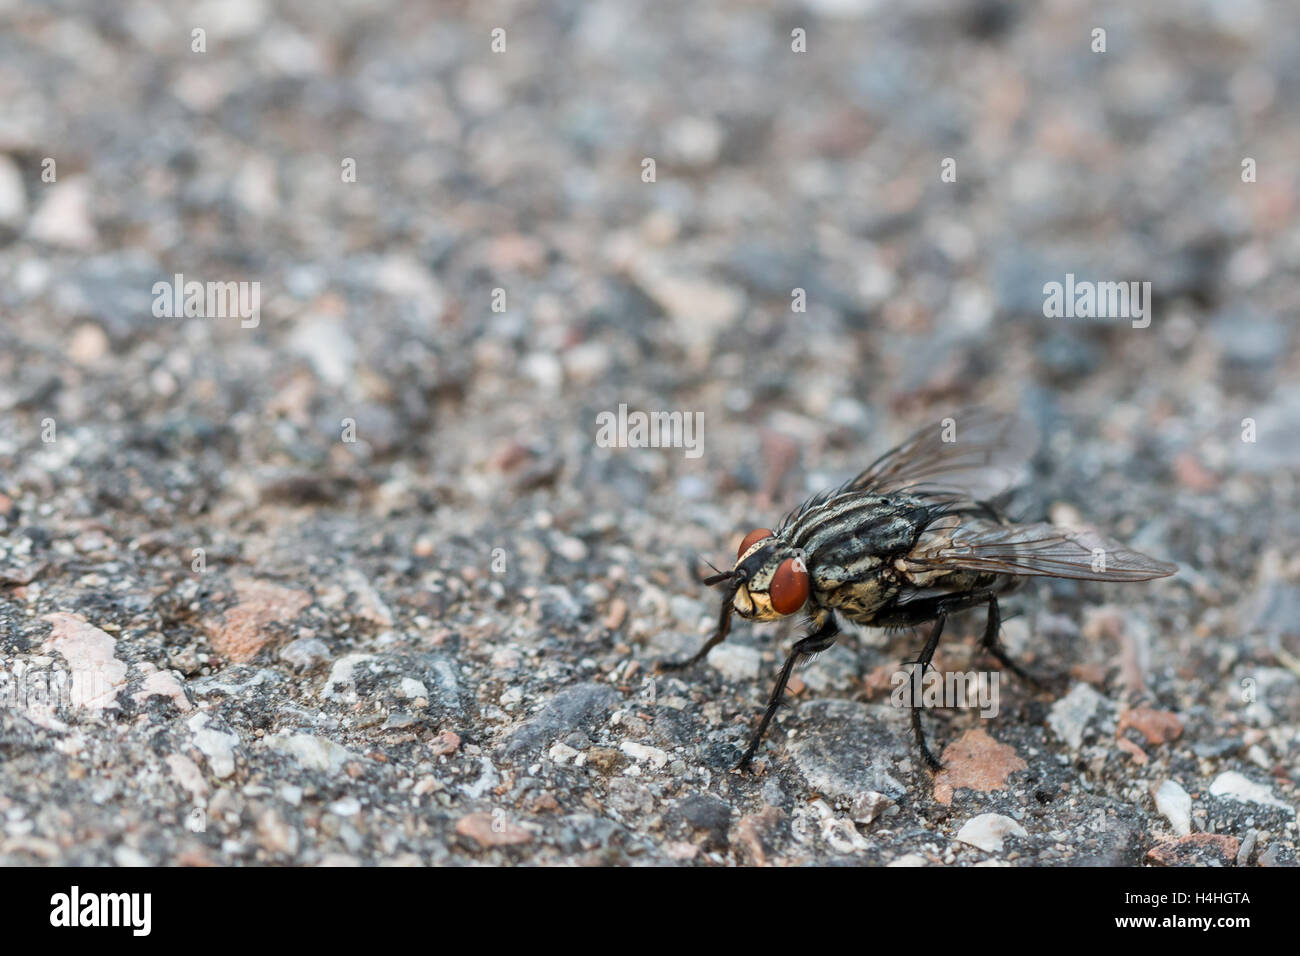 big black fly with red eyes on the pavement Stock Photo